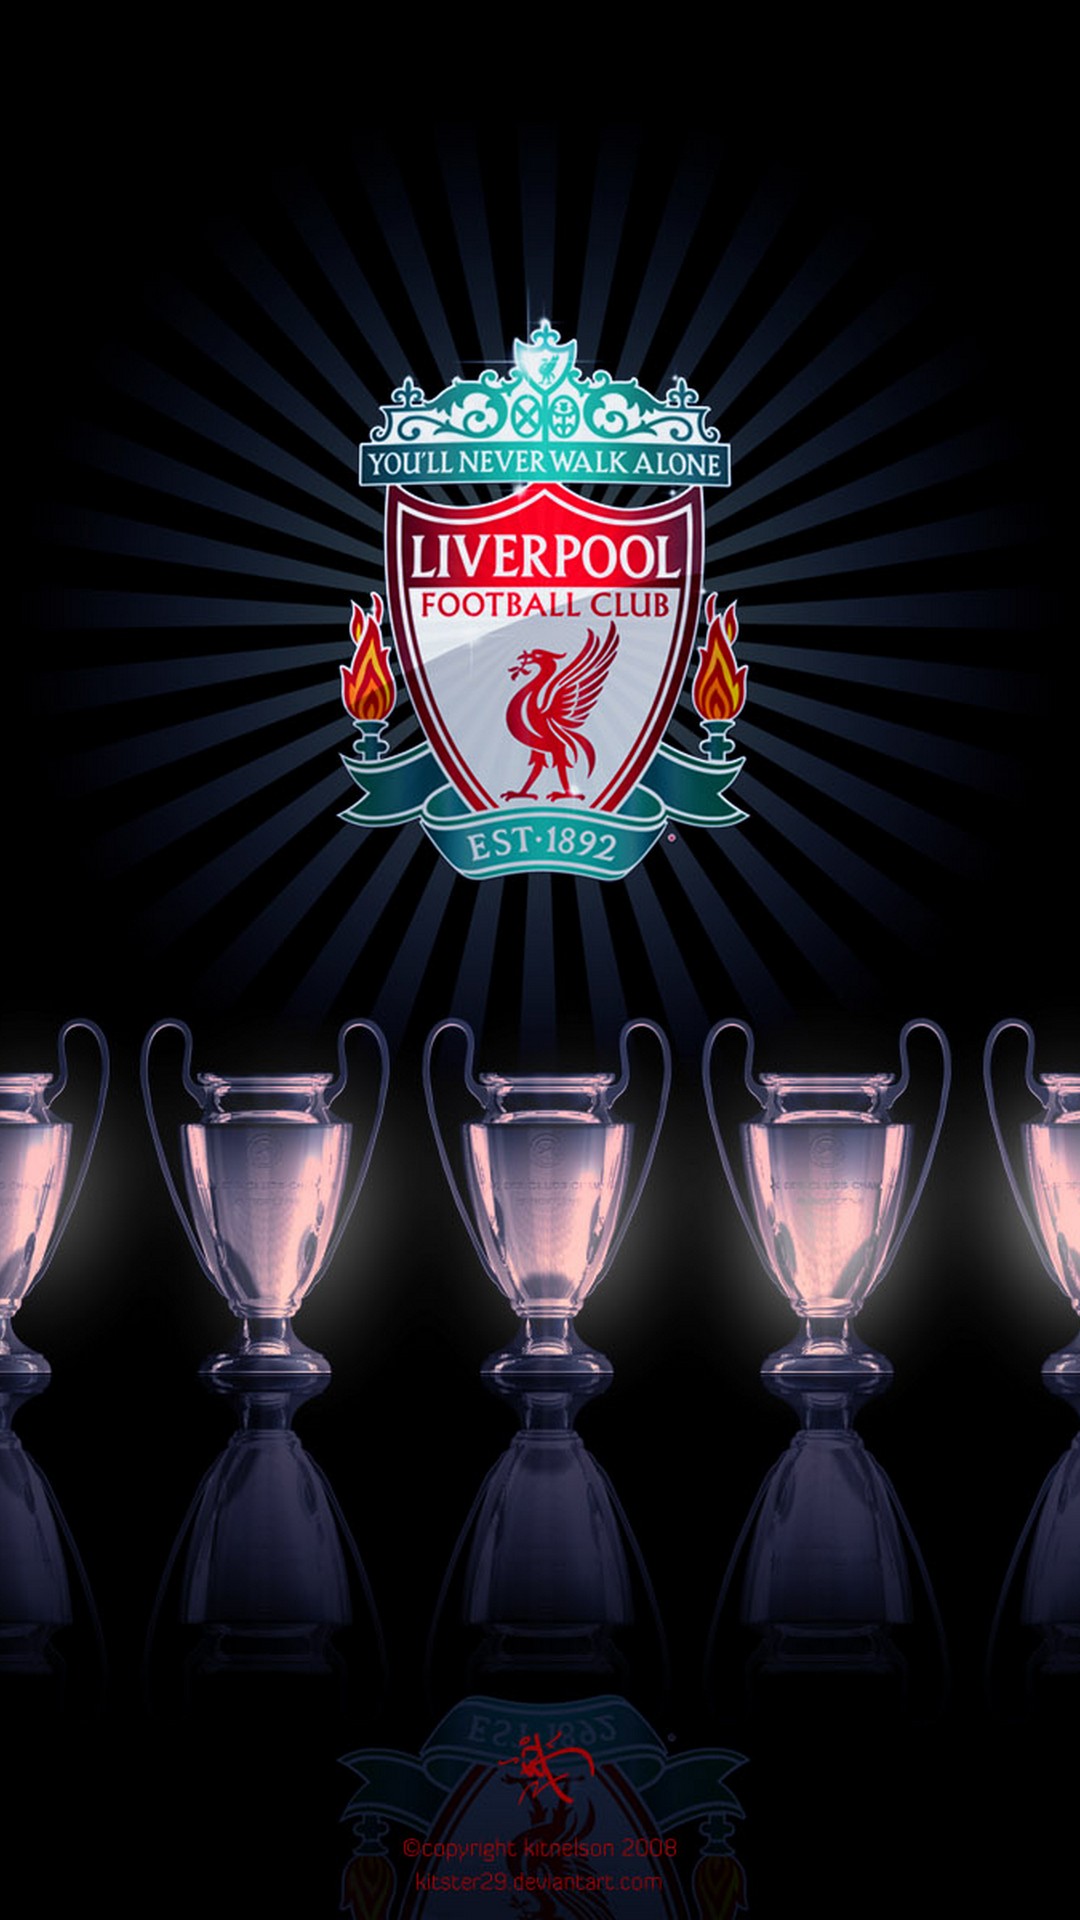 Liverpool Wallpaper iPhone With high-resolution 1080X1920 pixel. You can use this wallpaper for your iPhone 5, 6, 7, 8, X, XS, XR backgrounds, Mobile Screensaver, or iPad Lock Screen